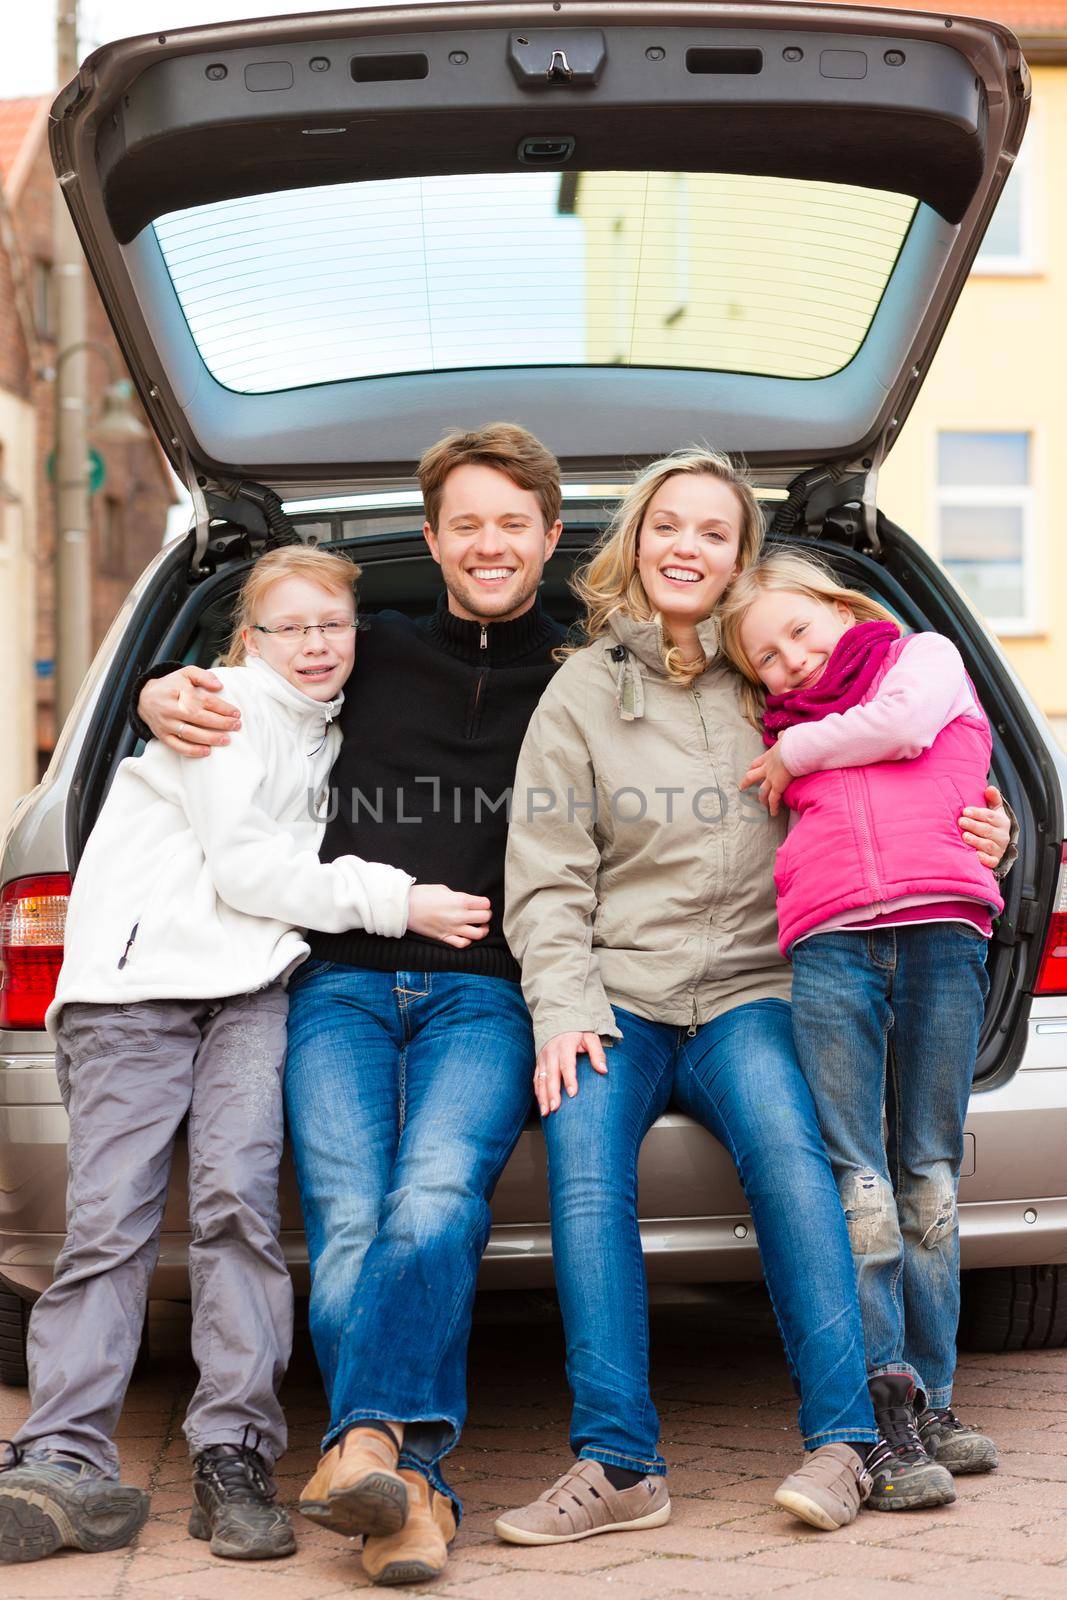 Family on a car trip sitting in the back by Kzenon